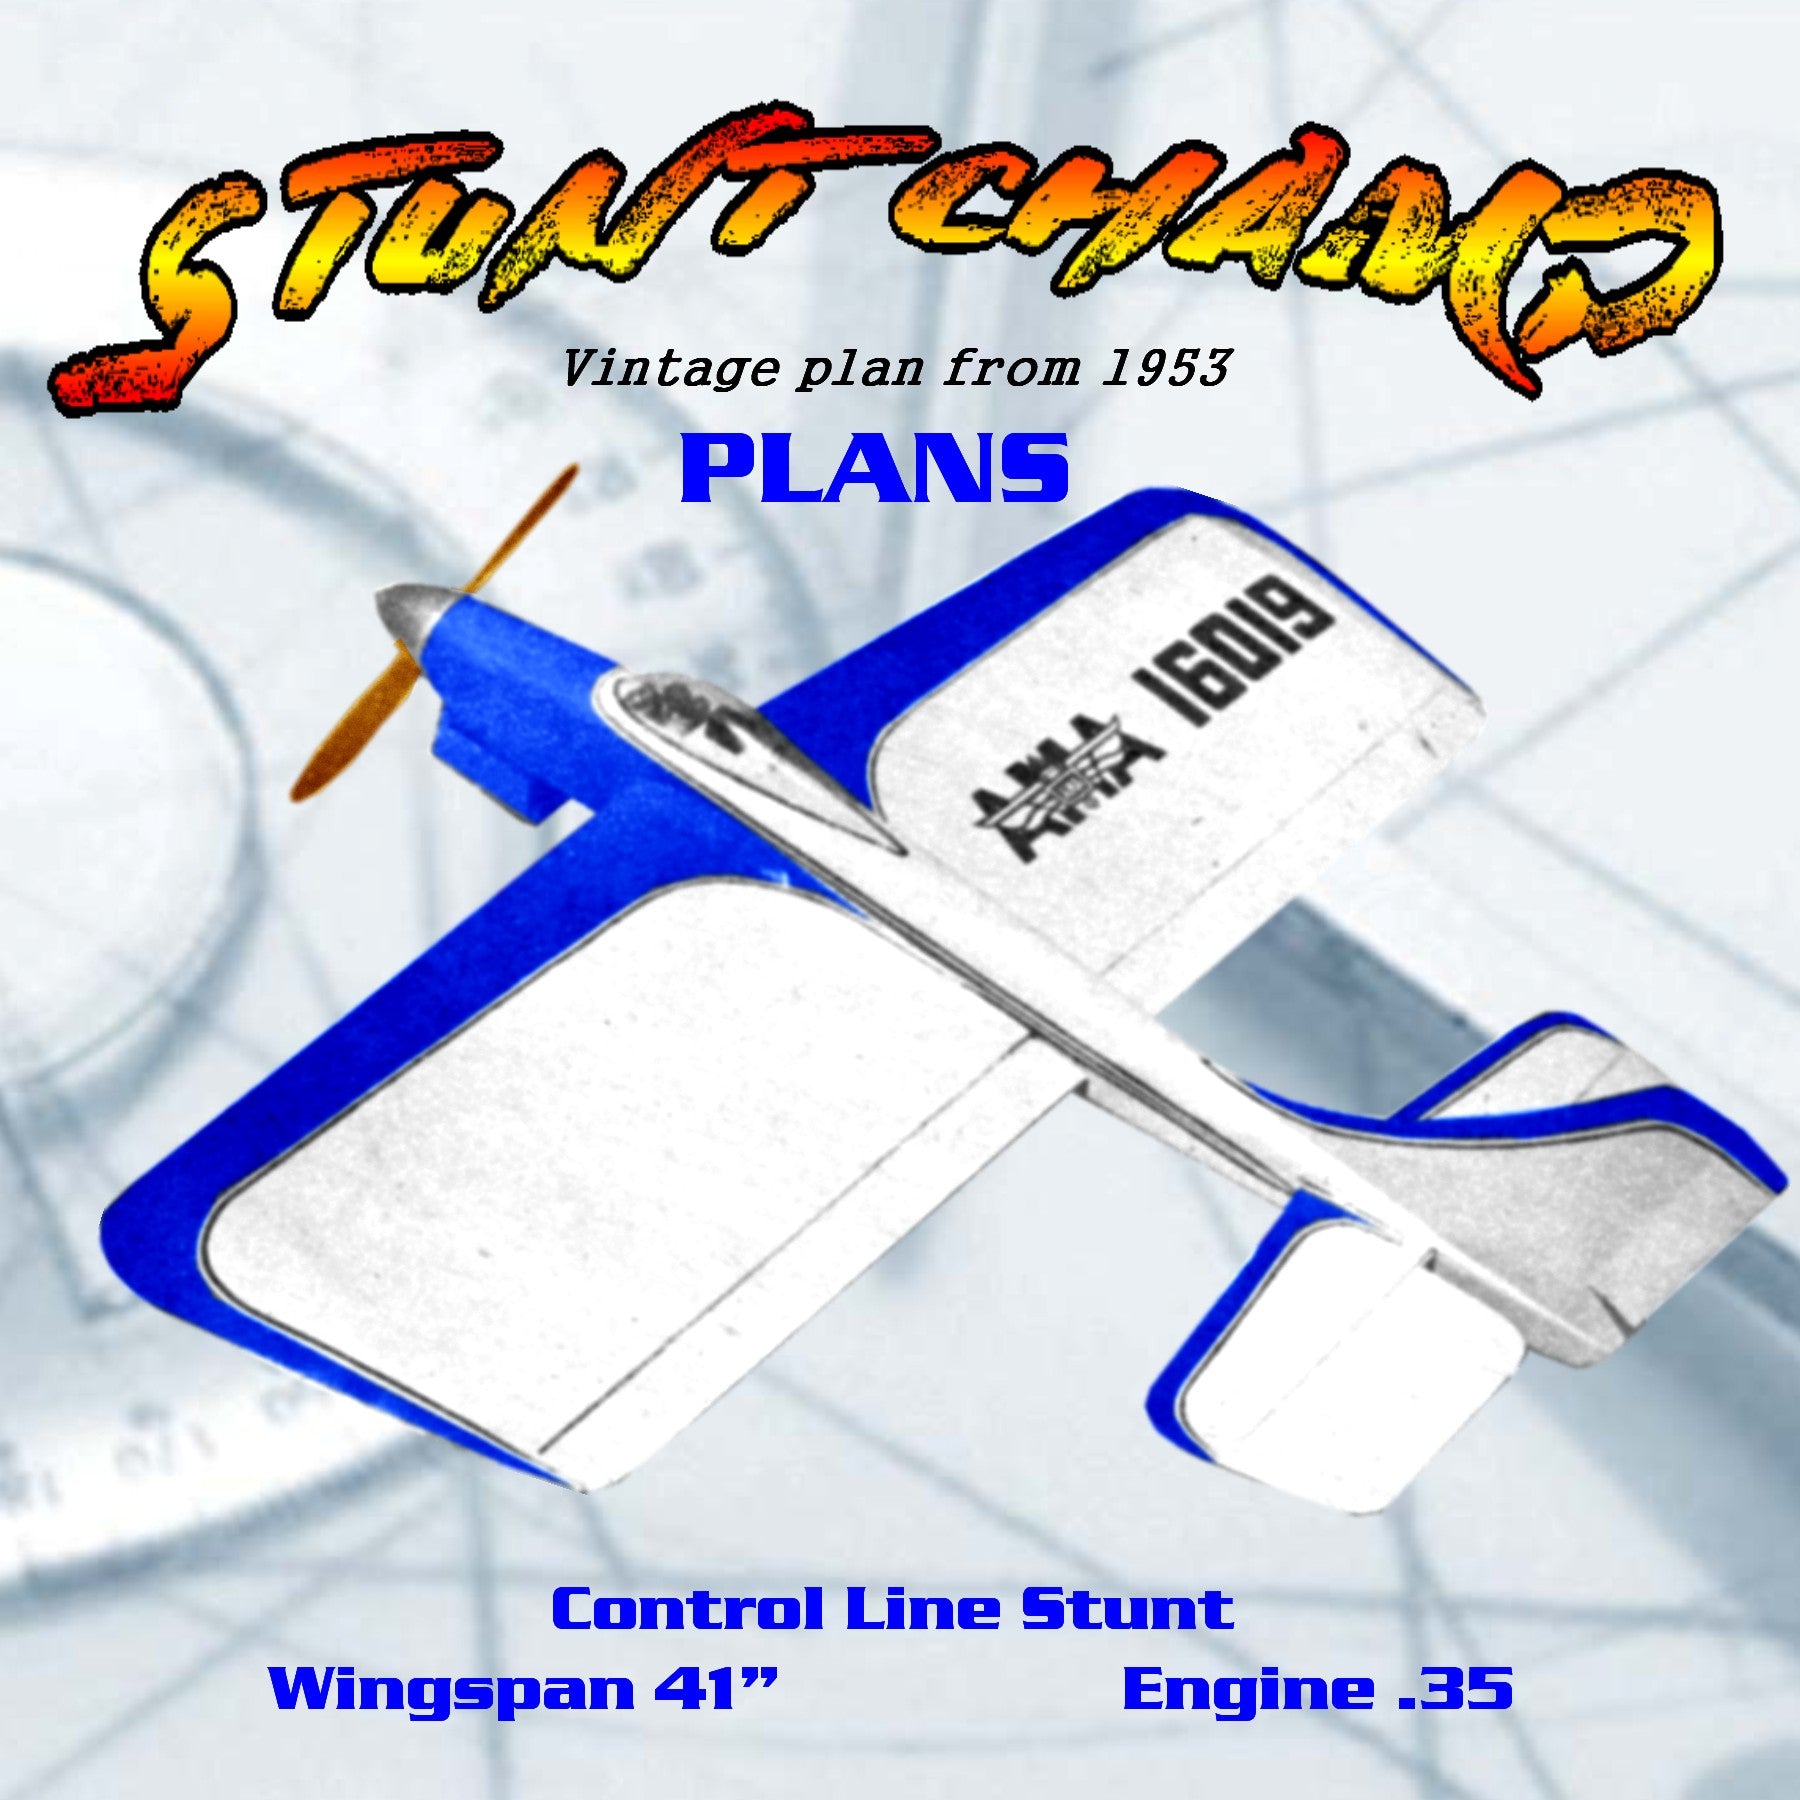 full size plan vintage 1953 .35 control line stunt stunt champ winner of air trails perpetual trophy